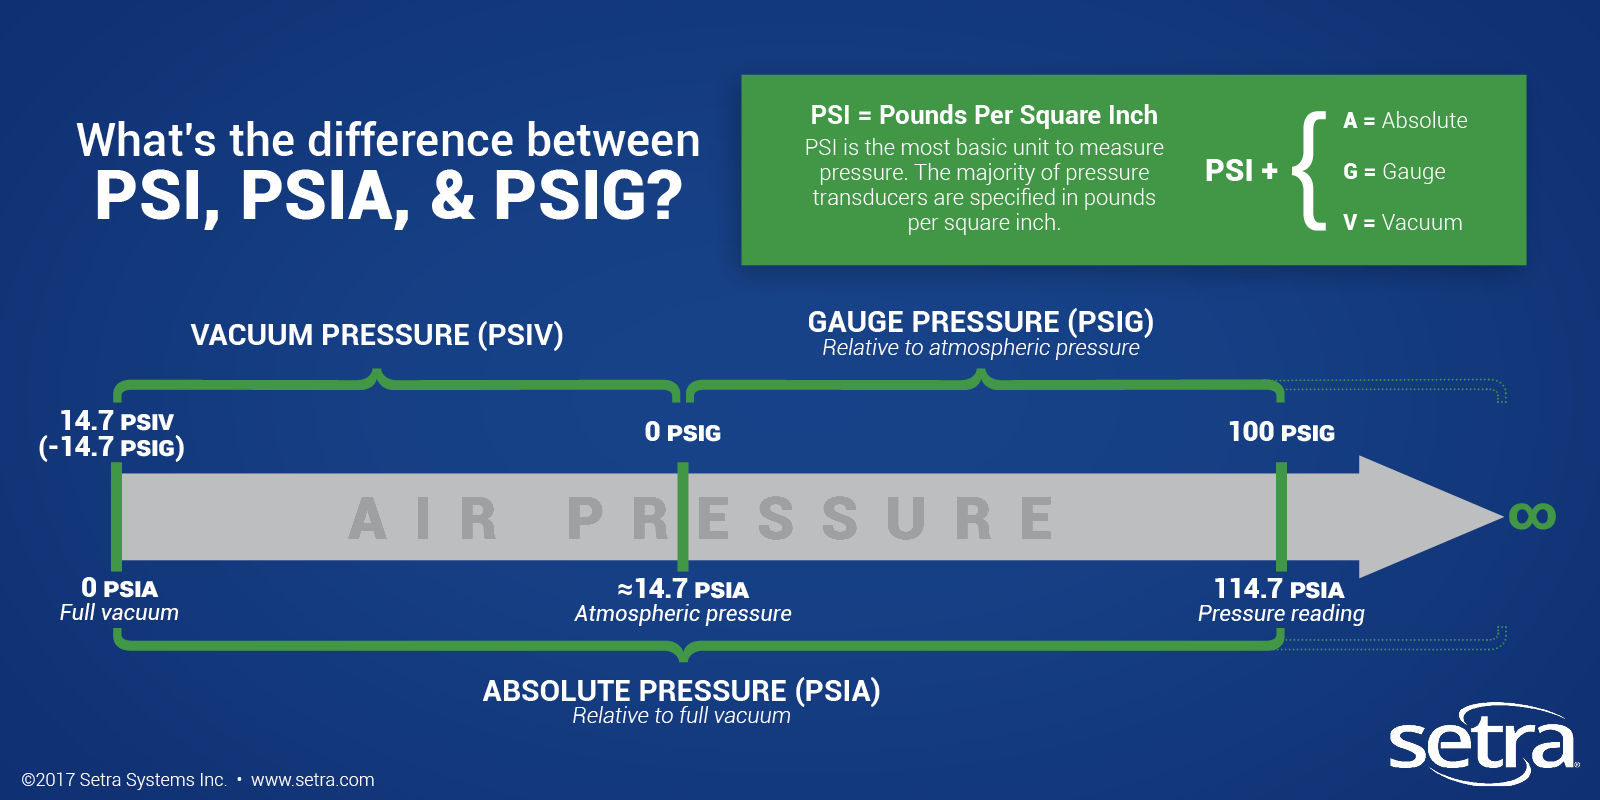 What's the Difference Between PSI, PSIA, & PSIG?